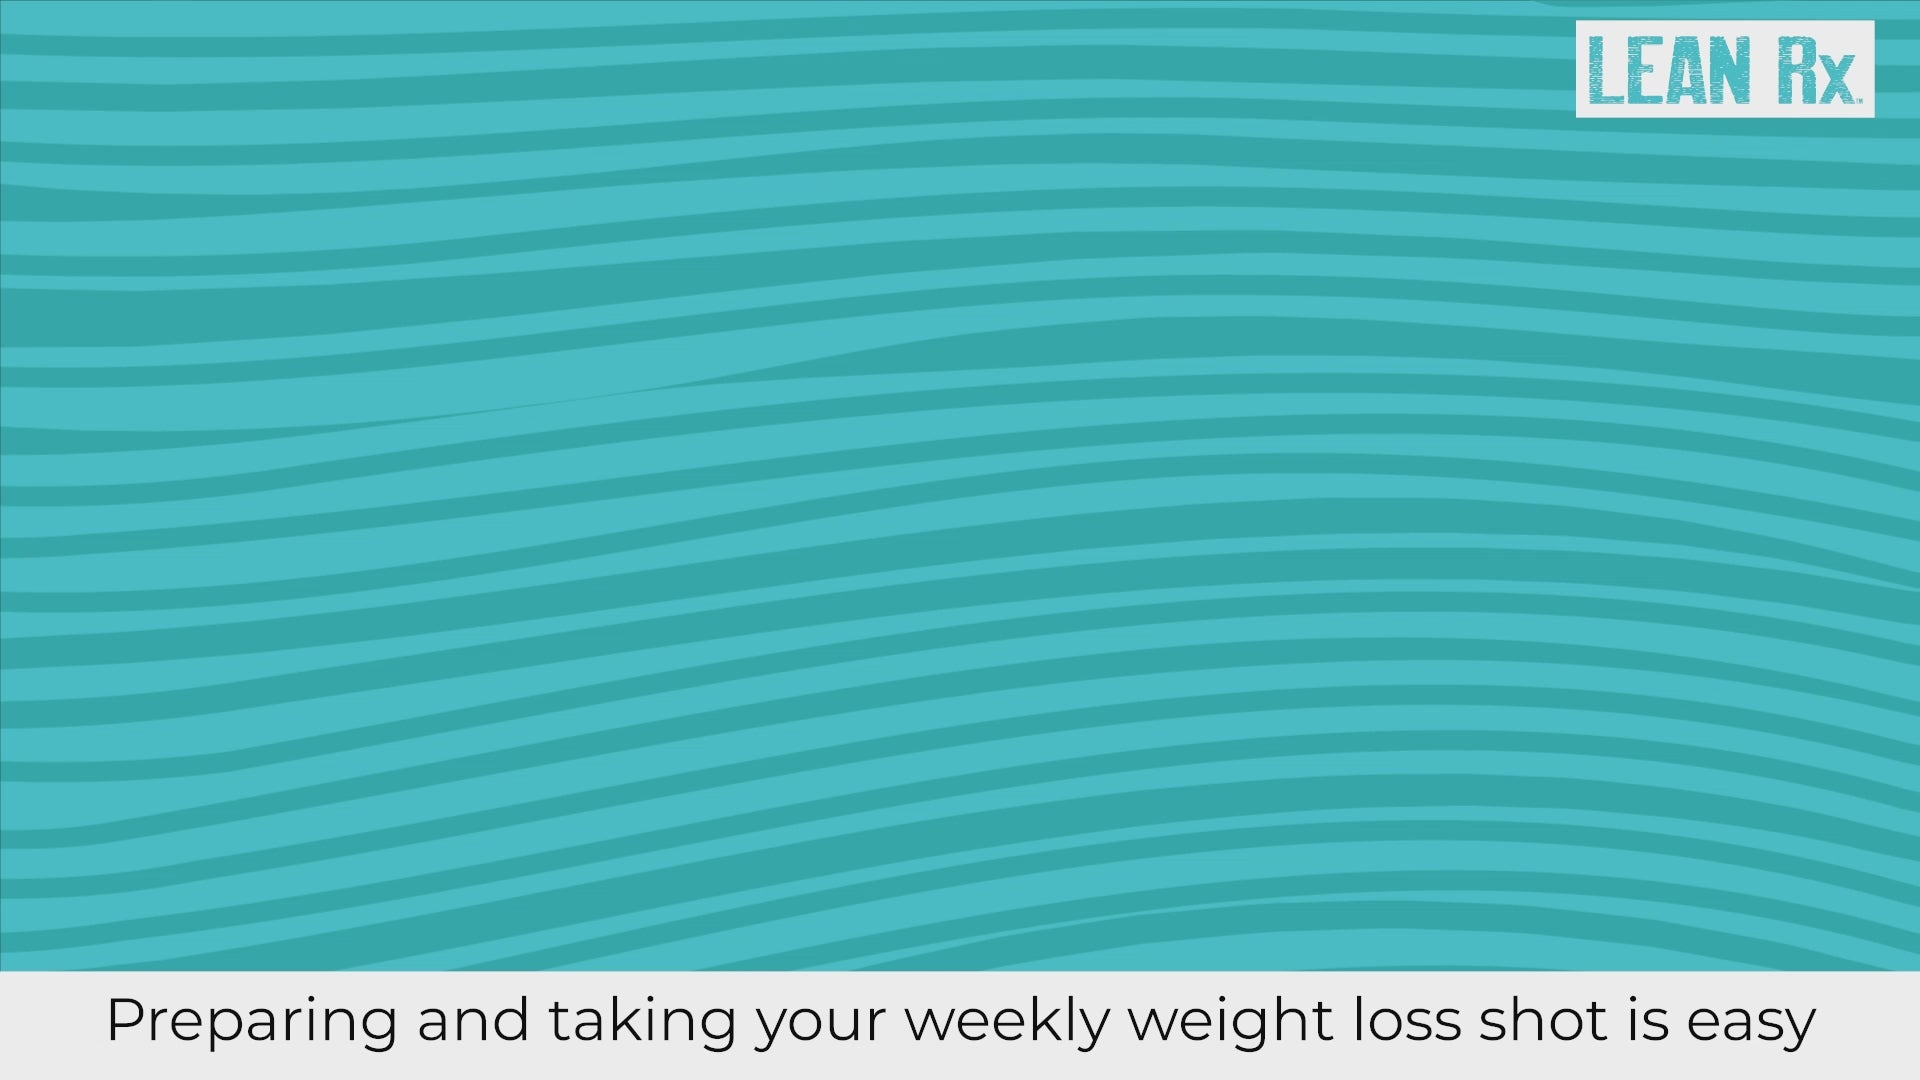 Load video: animated video explaining the process of self-administering a weekly weight loss shot.